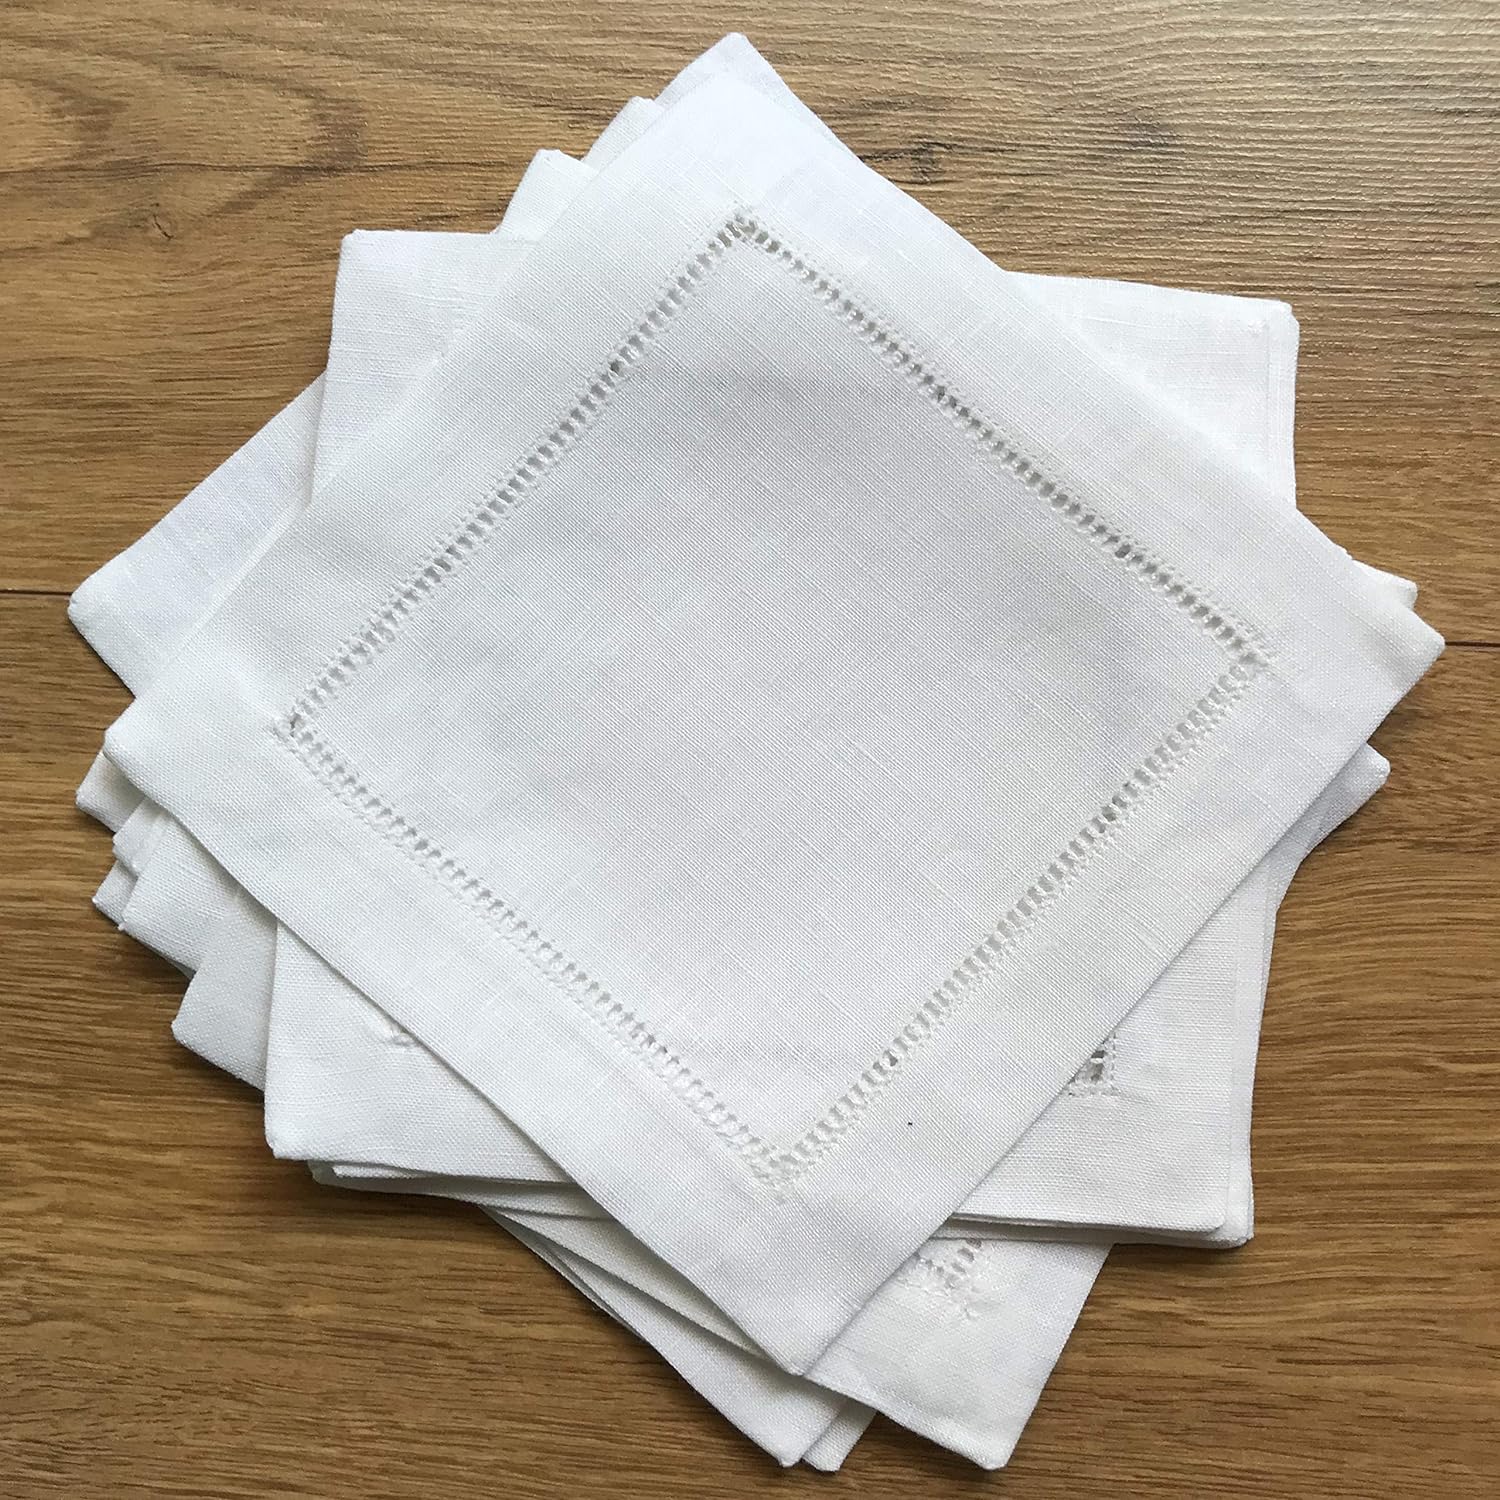 12 Pieces of 6"x6" white Hemstitched Cocktail Napkins